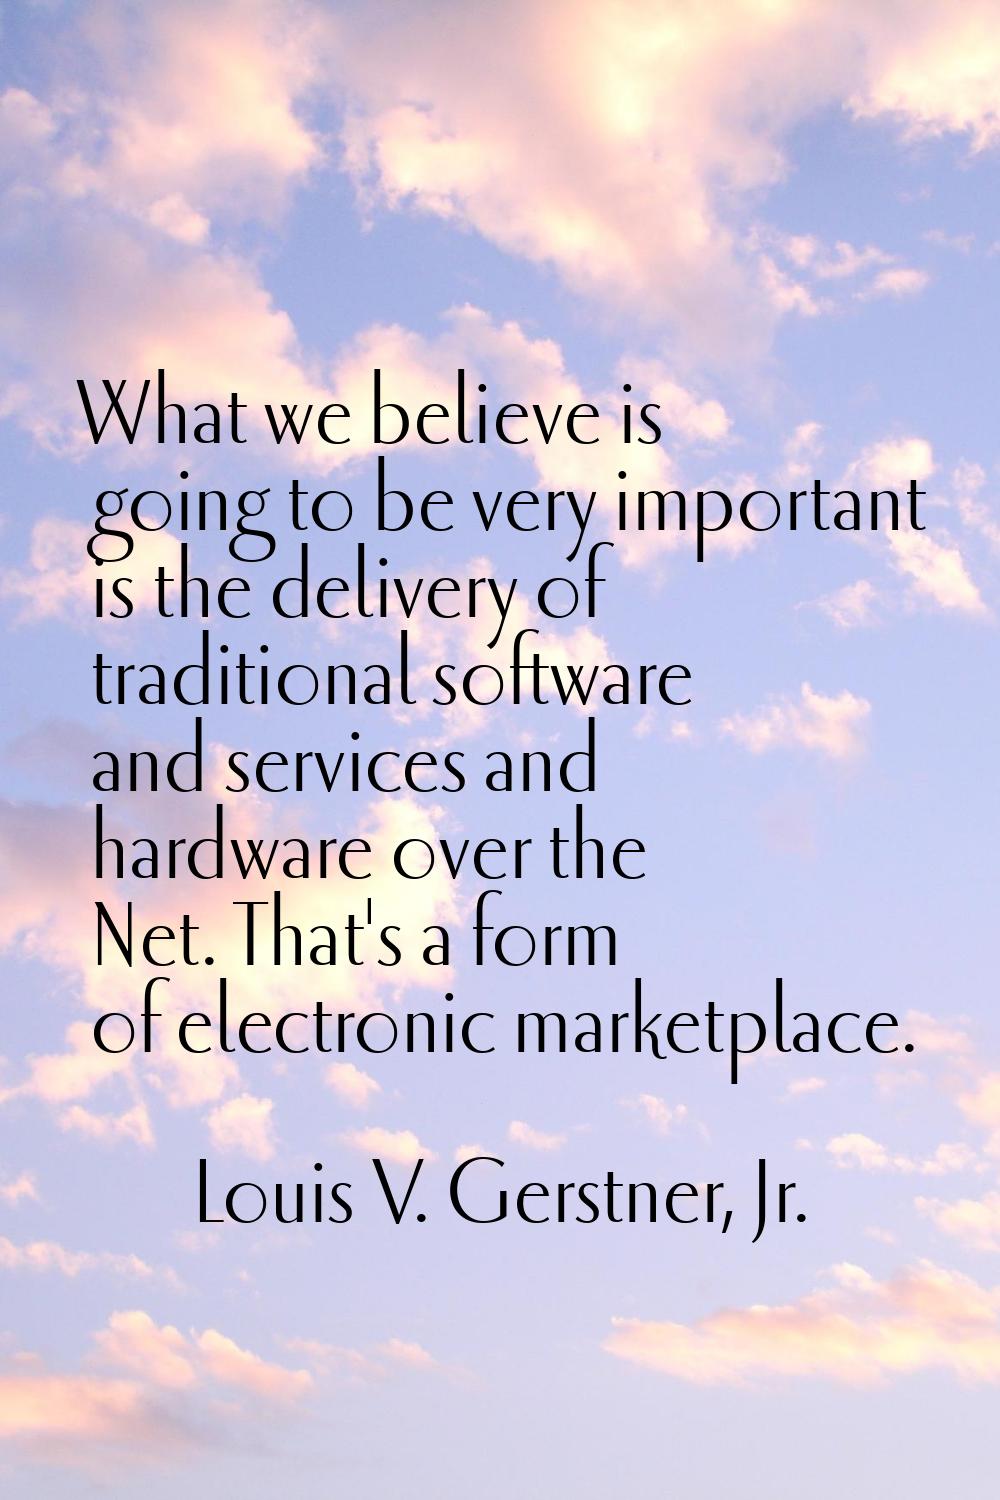 What we believe is going to be very important is the delivery of traditional software and services 